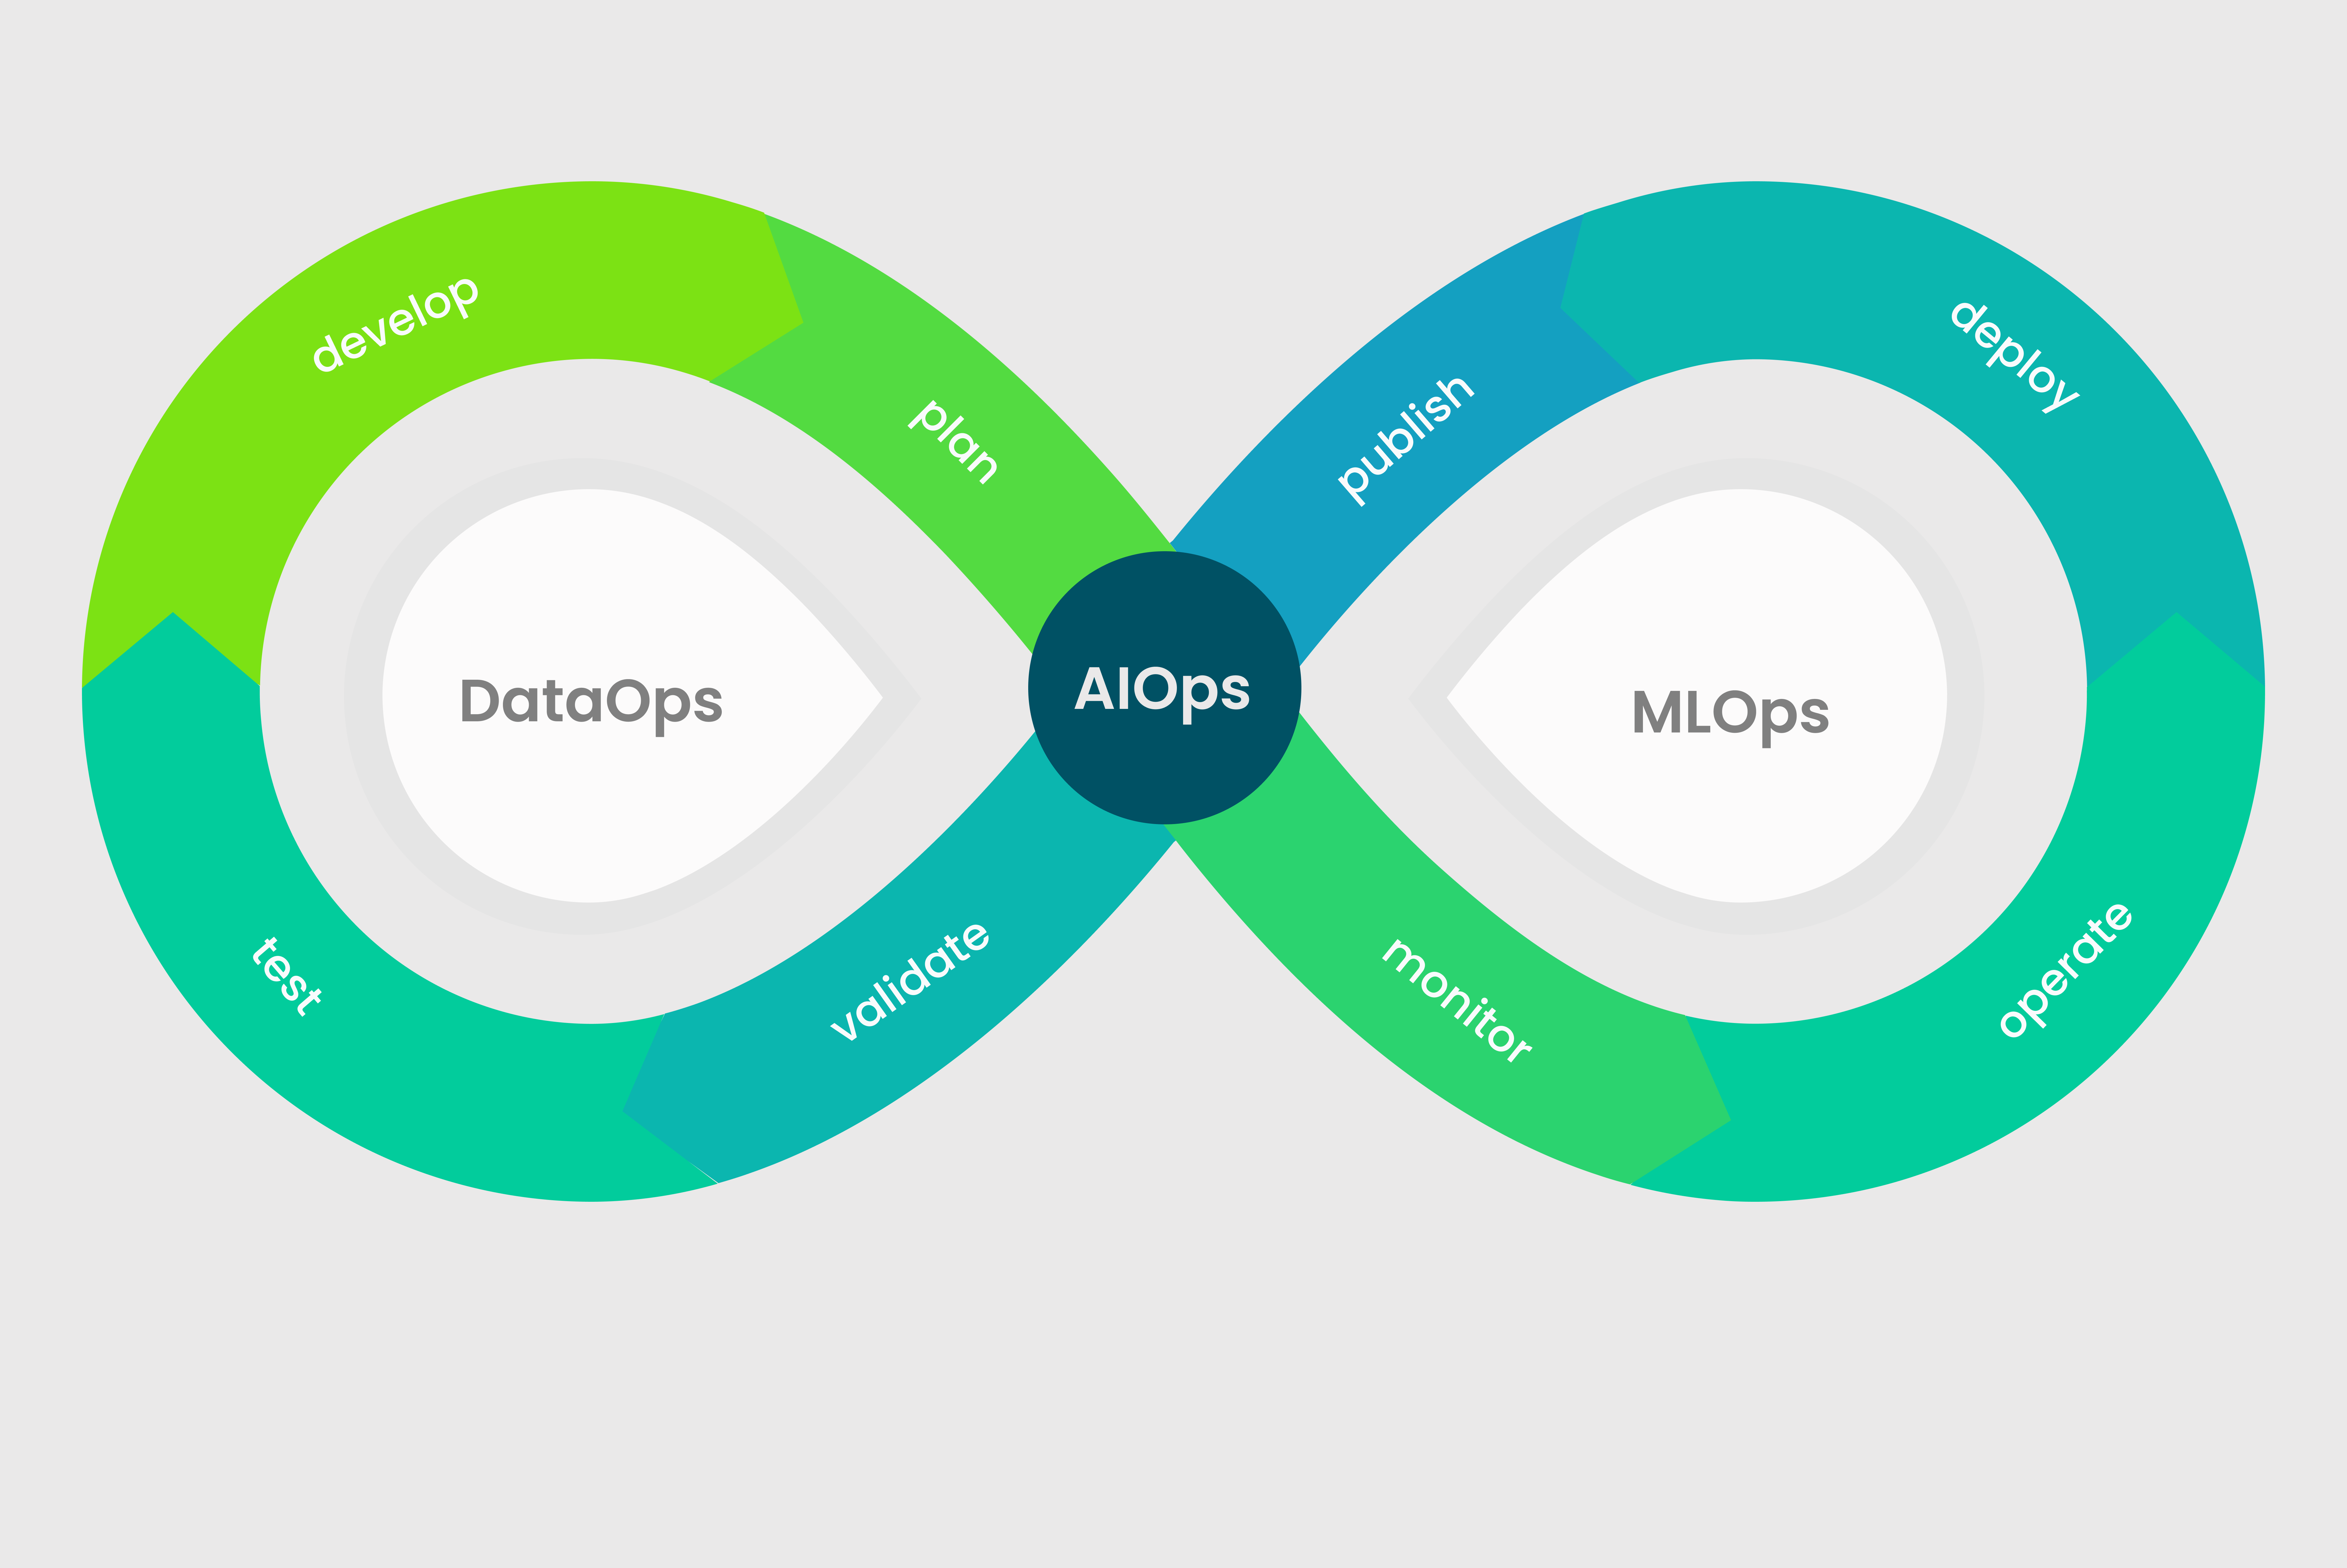 How DataOps, AIOps, And MLOps Are Disrupting IT Operations